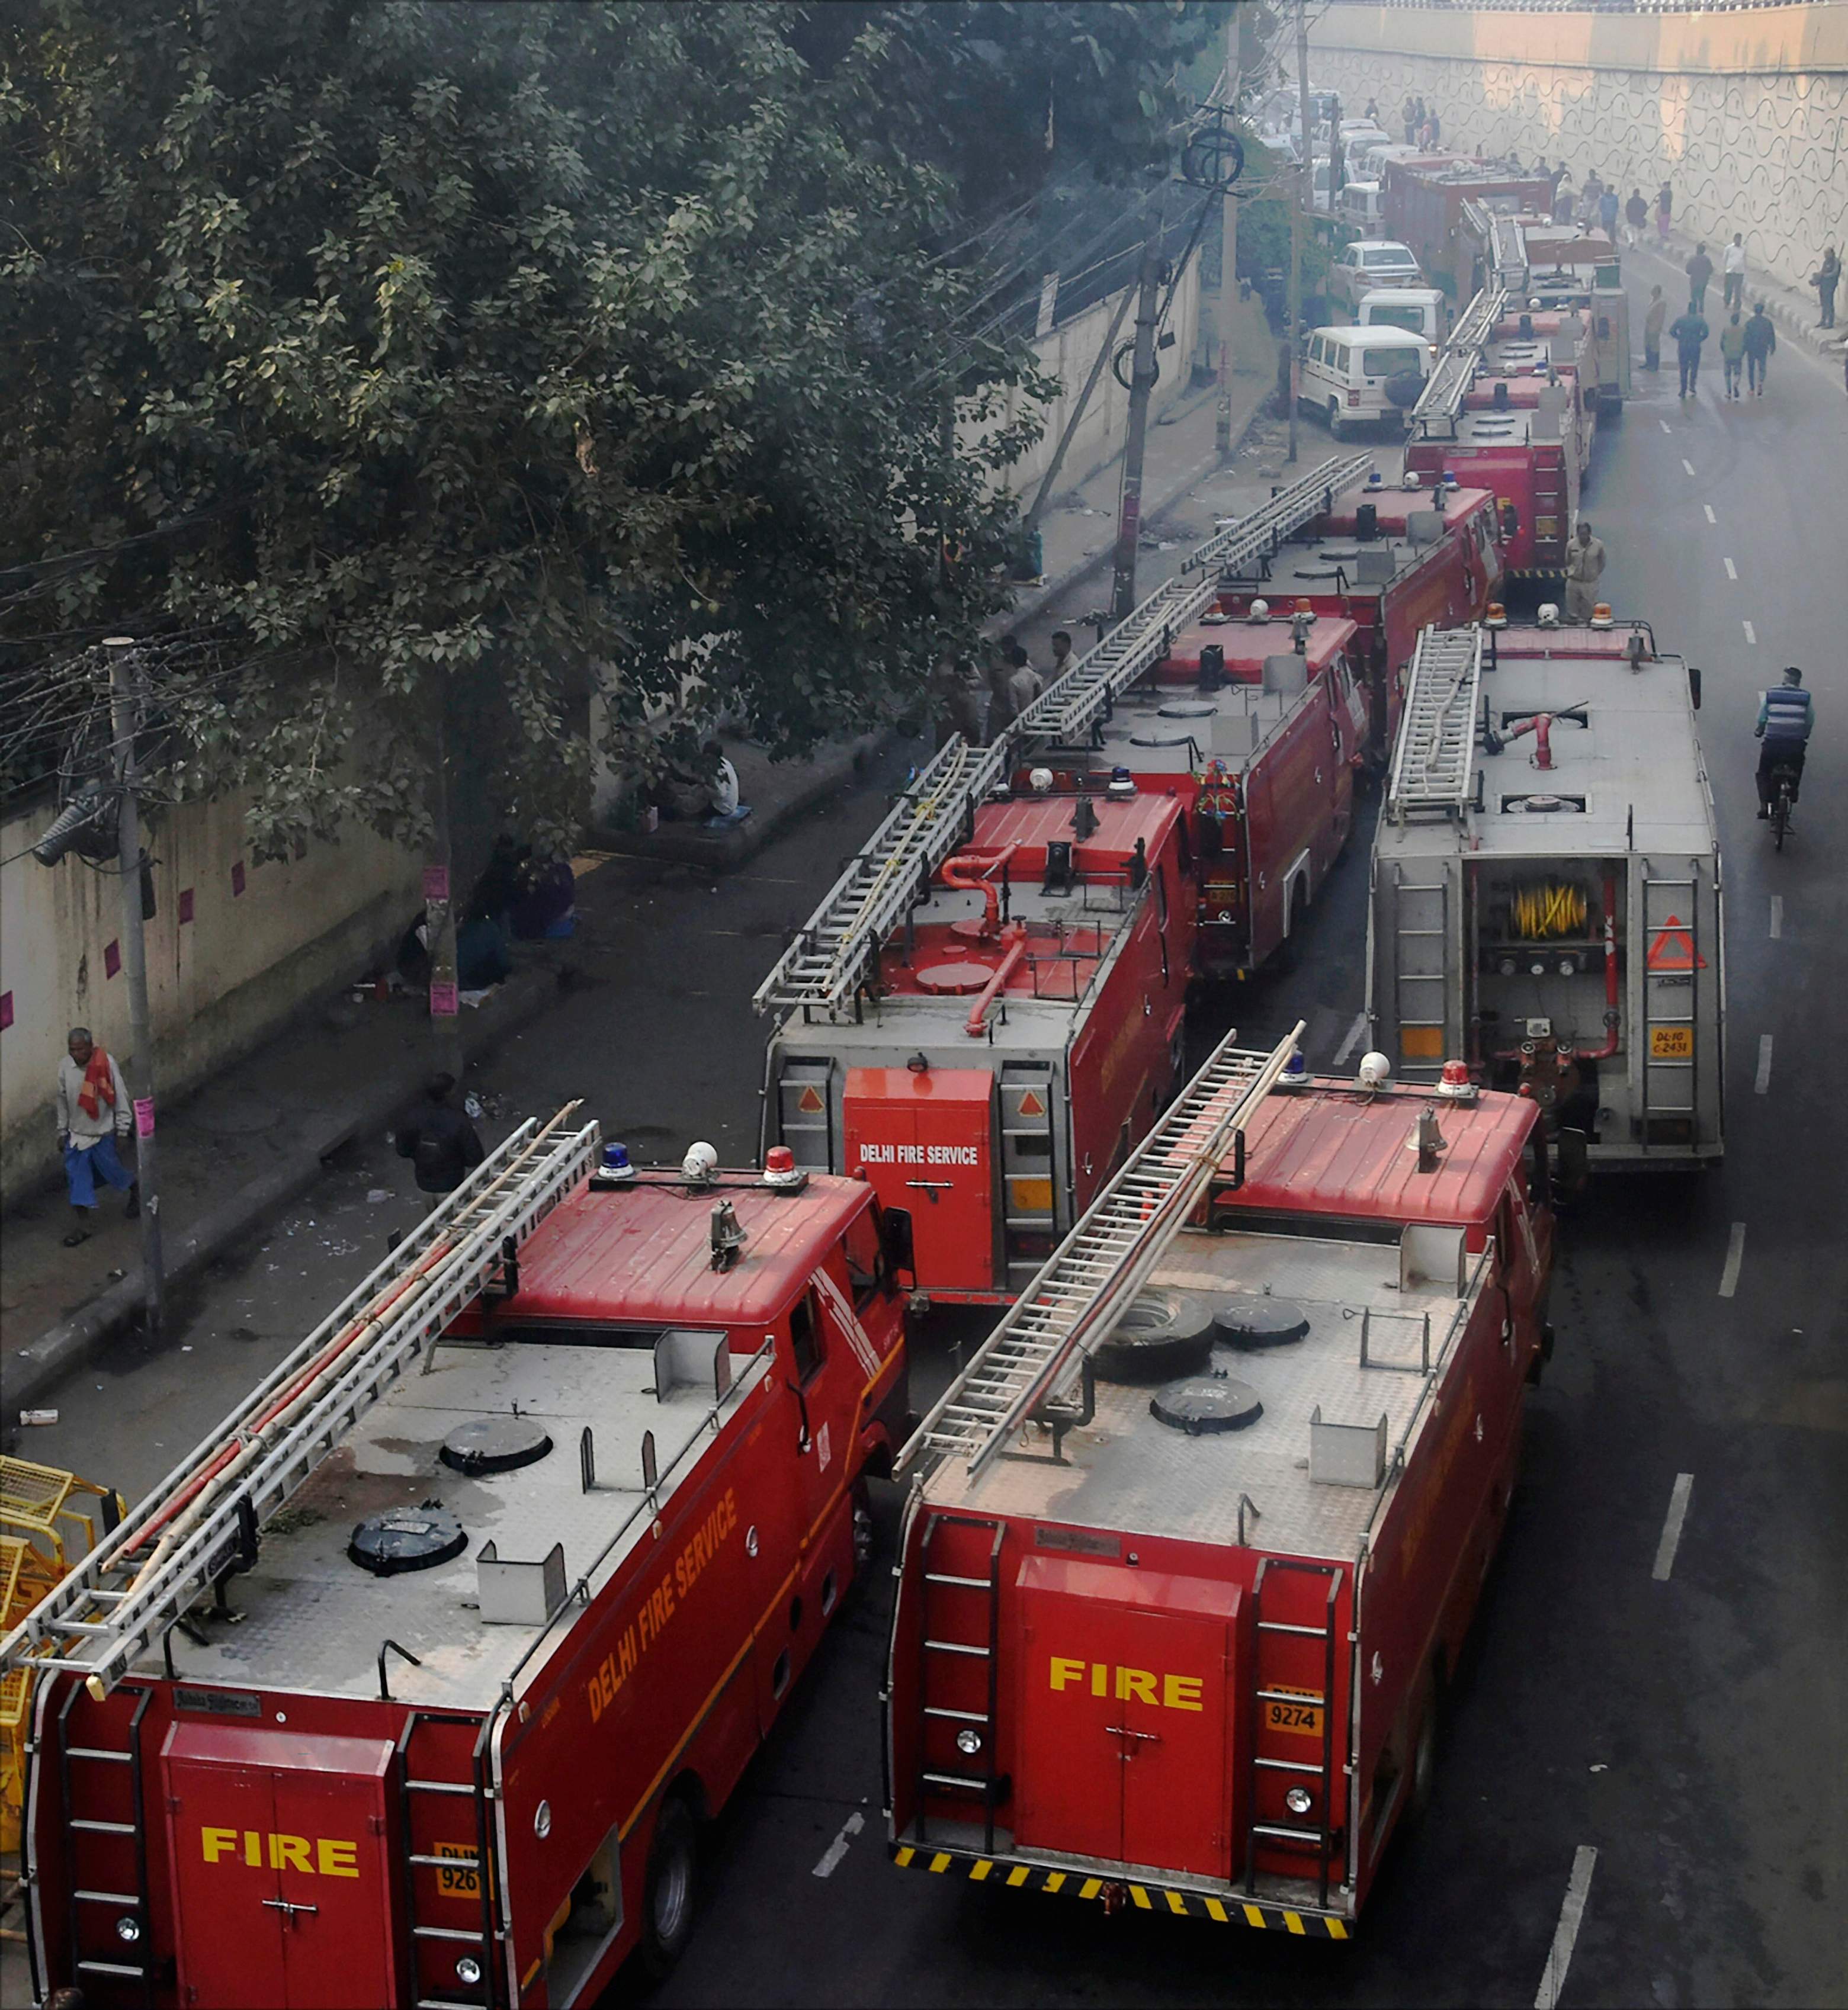 New Delhi: Fire tenders on their way to a factory at Rani Jhansi Road, where a major fire broke out, in New Delhi, Sunday morning, Dec. 8, 2019. Atleast 35 people were killed and several others injured in the mishap. (PTI Photo) (PTI12_8_2019_000011B)